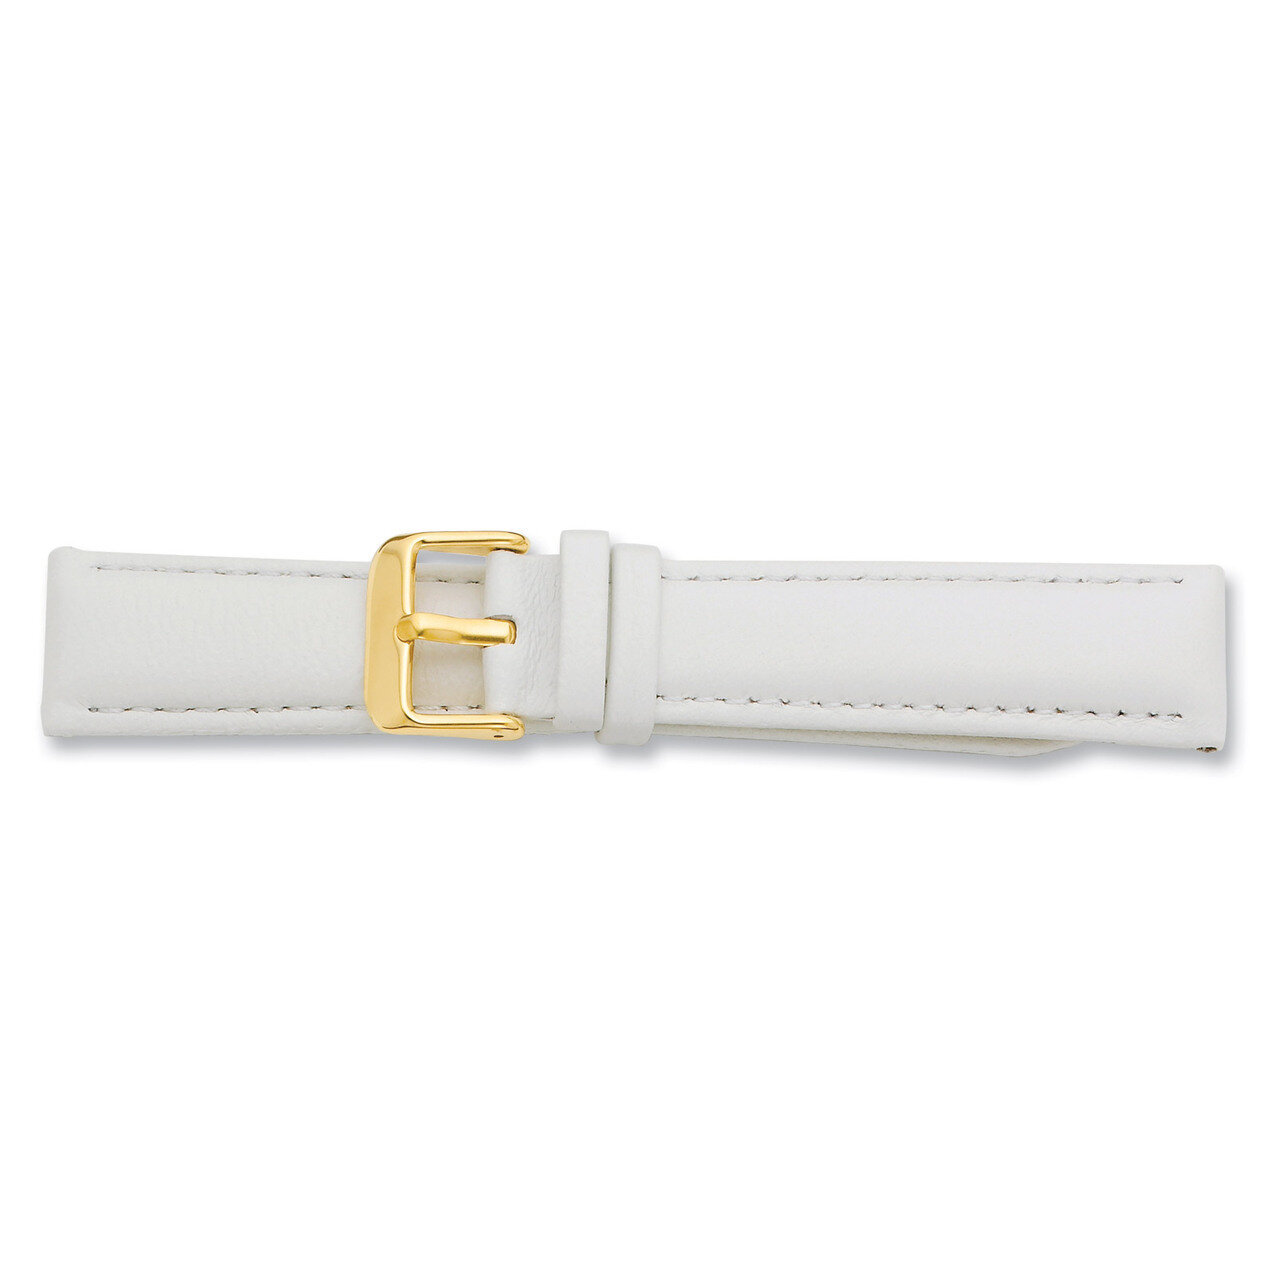 14mm White Glove Leather Buckle Watch Band 6.75 Inch Gold-tone BA197-14